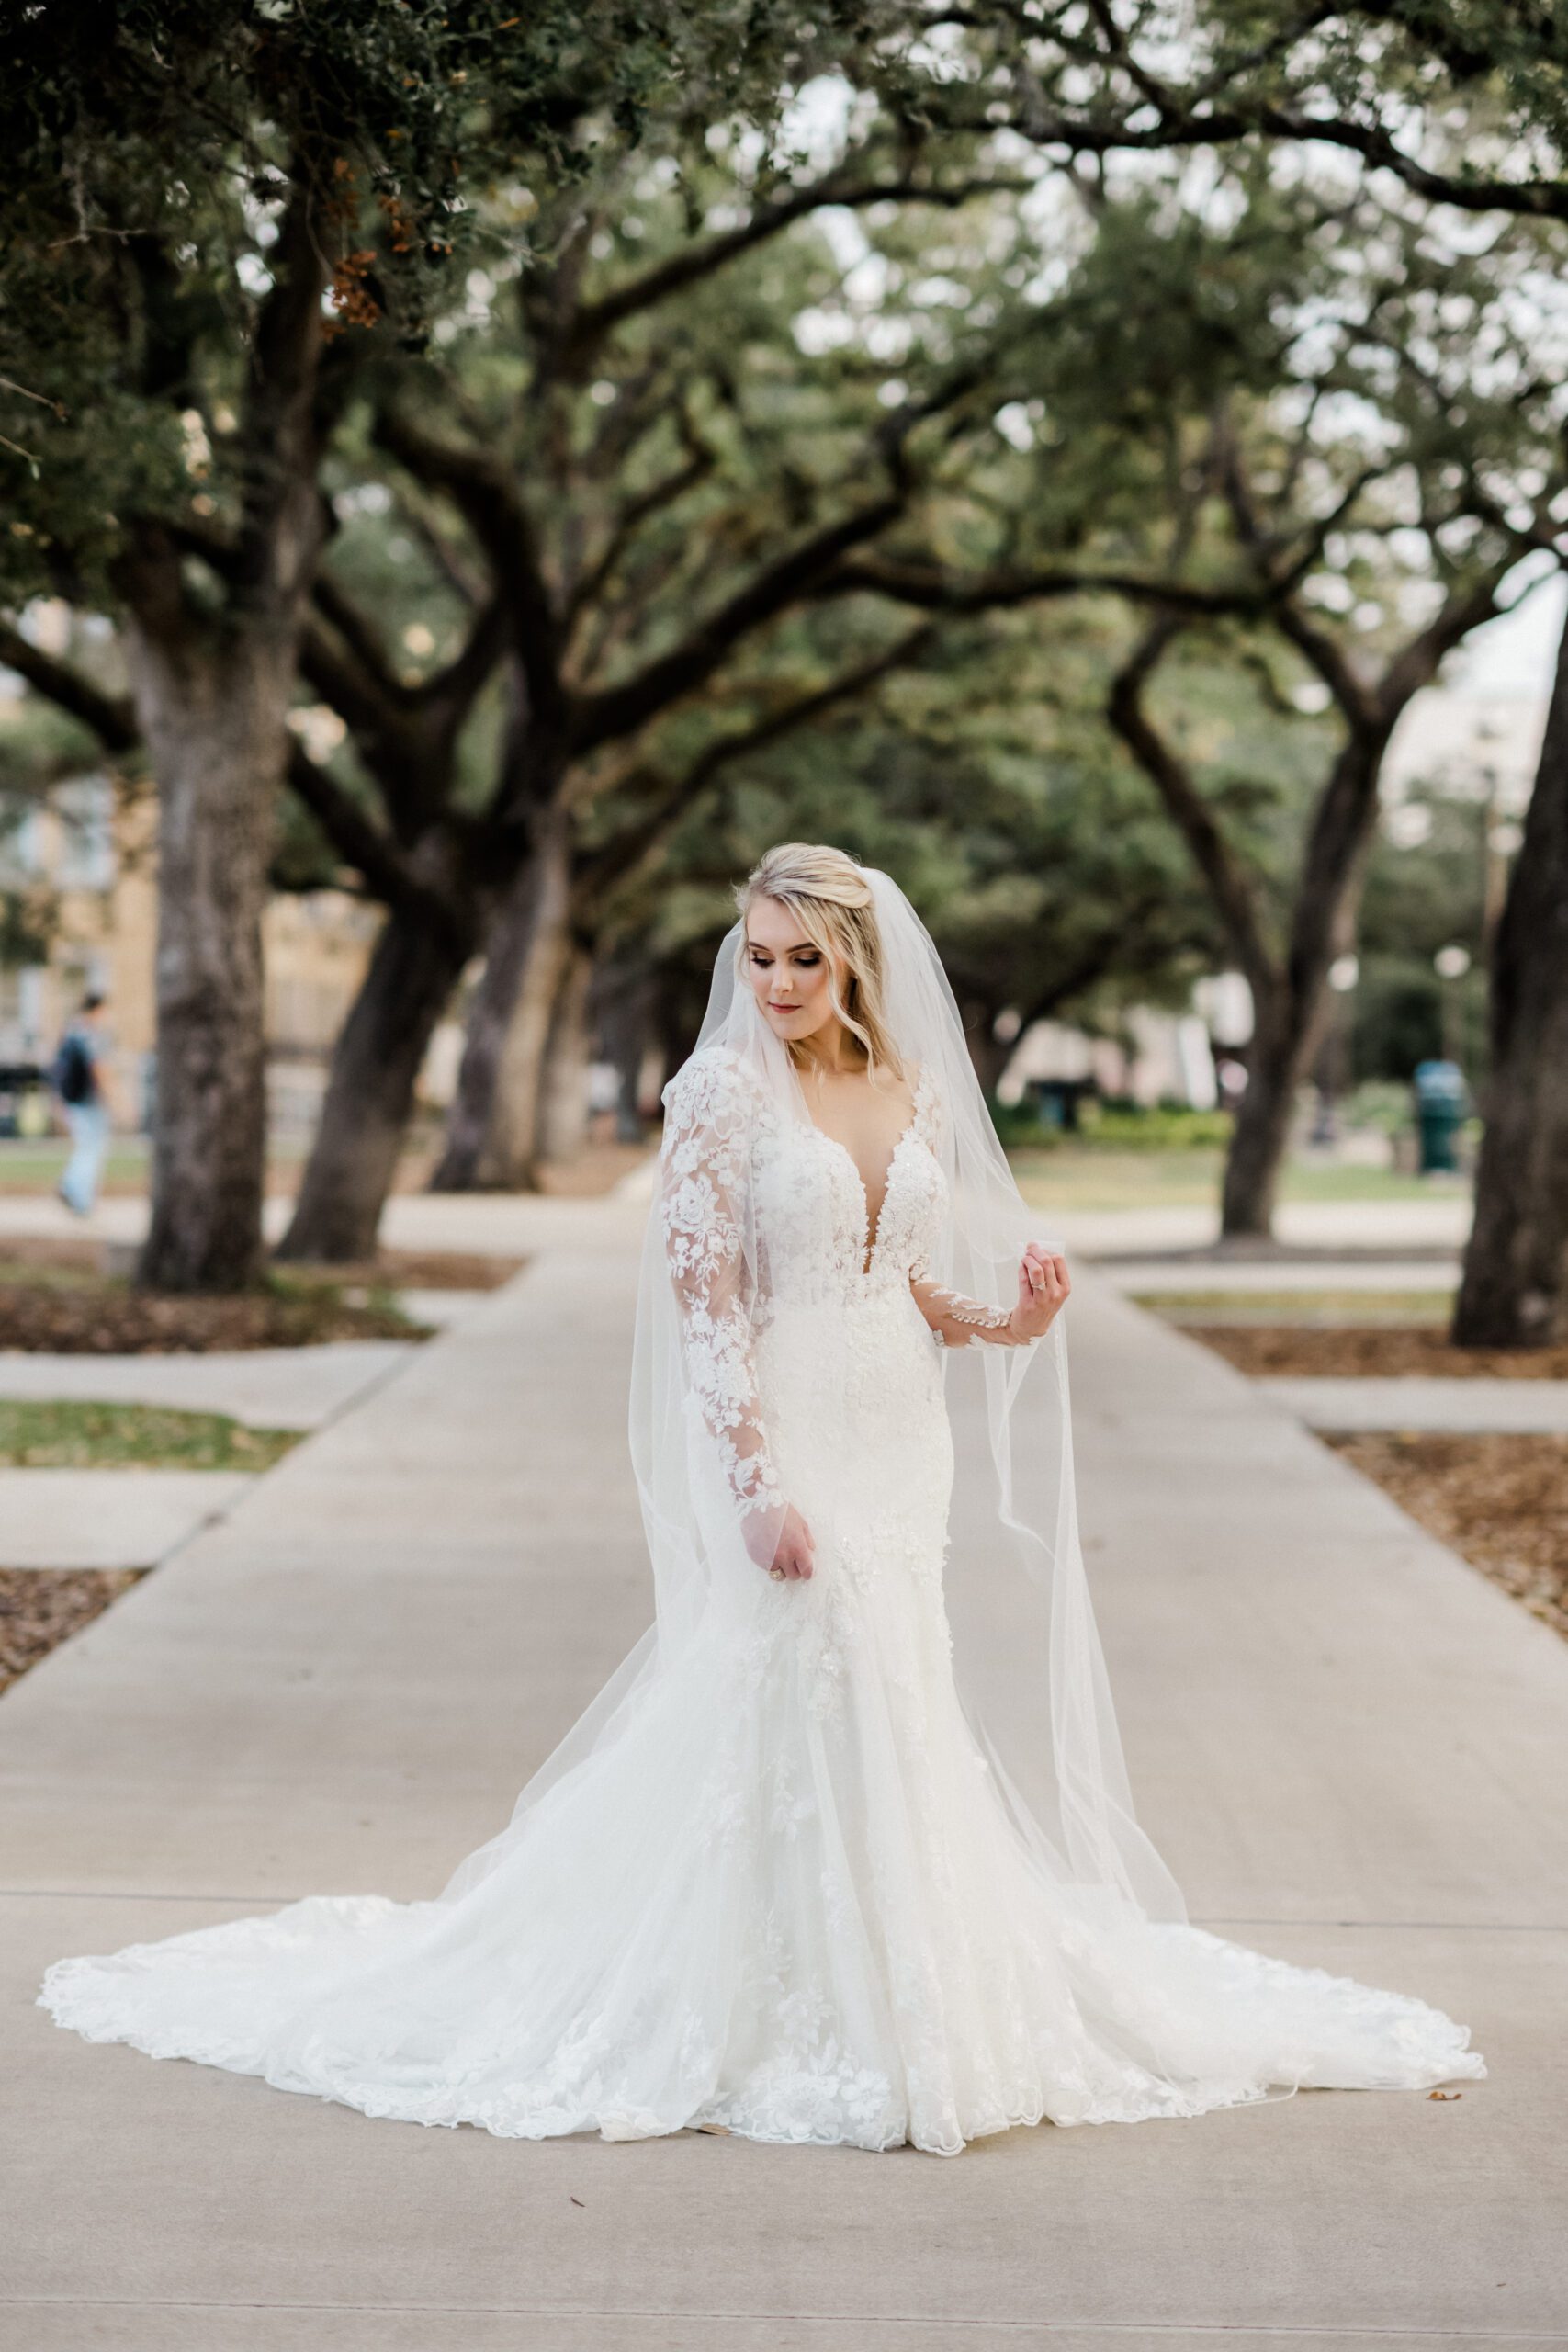 Macey's Bridal Session at Texas A&M University in College Station, TX with Rachel Driskell Photography